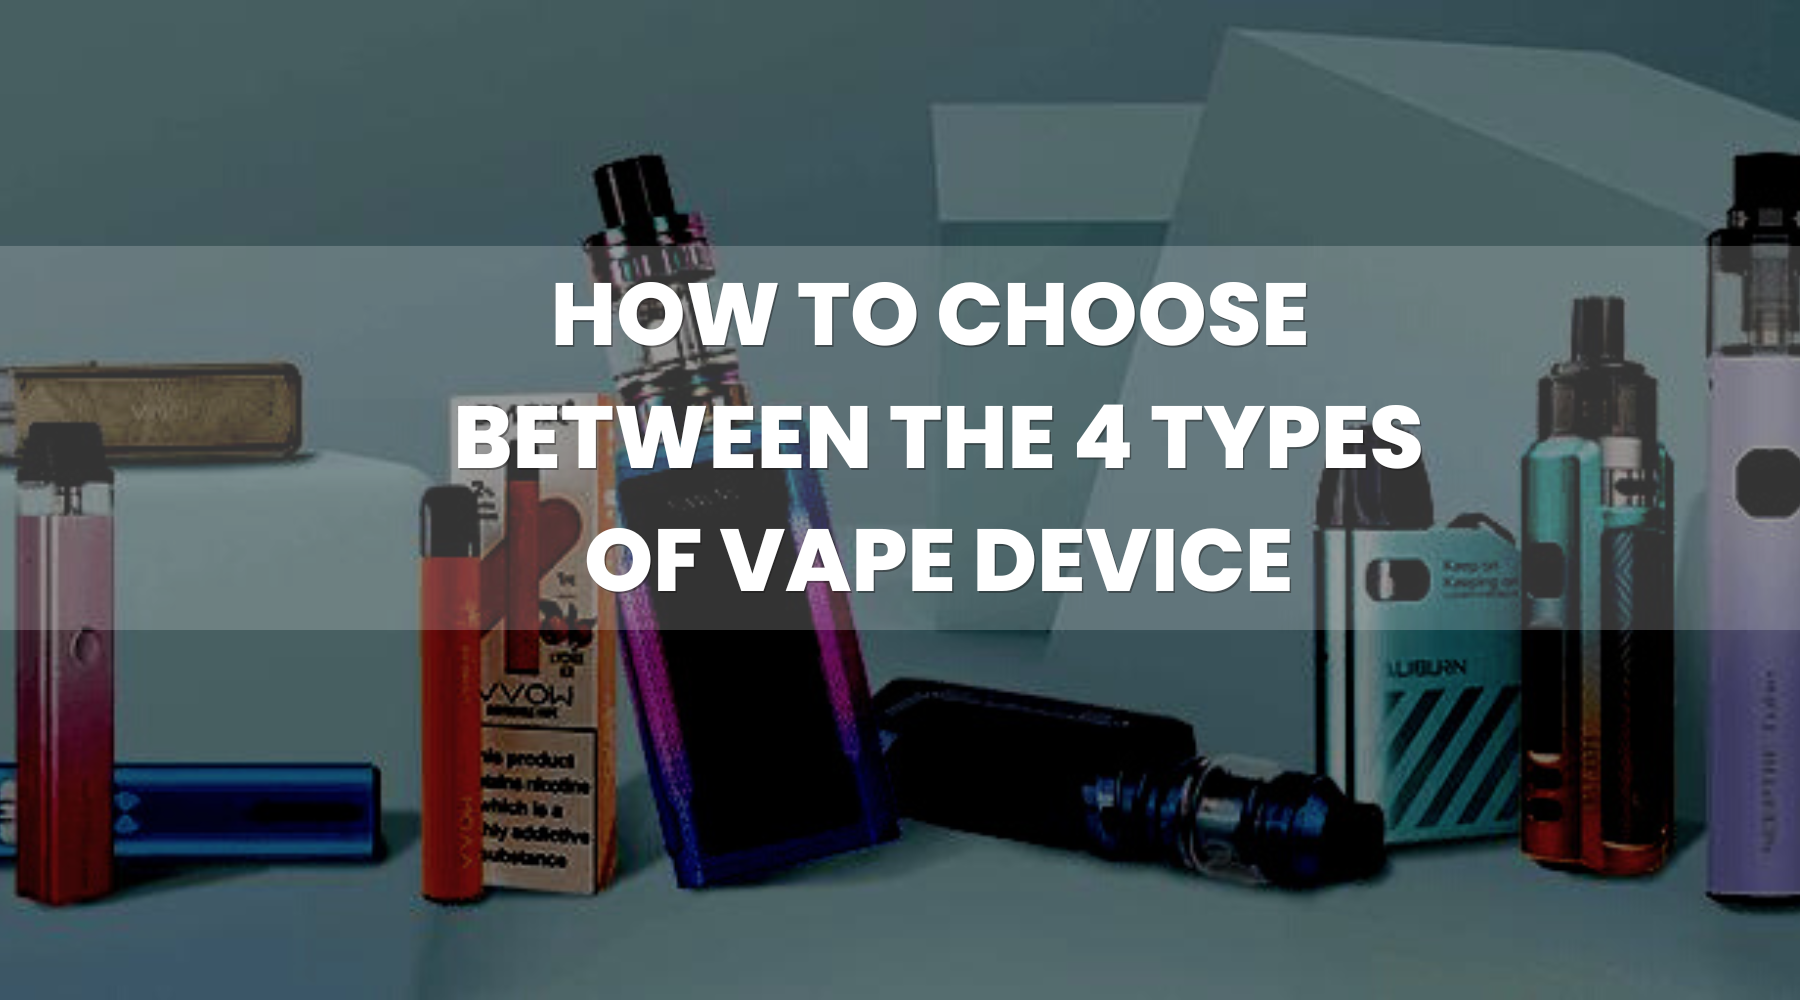 How to Choose Between the 4 Types of Vape Device